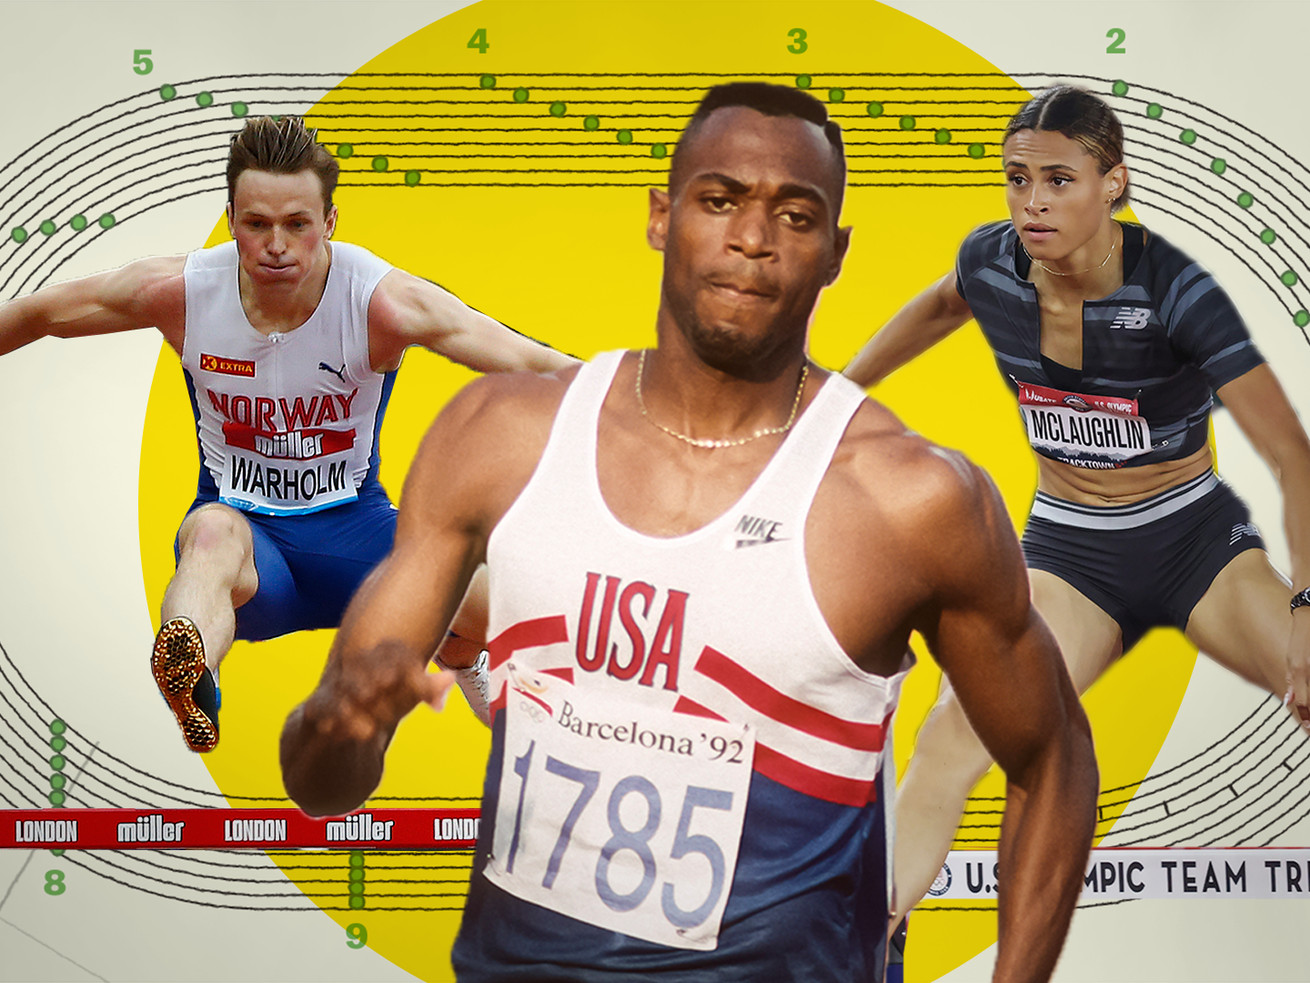 Why the 400m hurdles is one of the hardest Olympic races